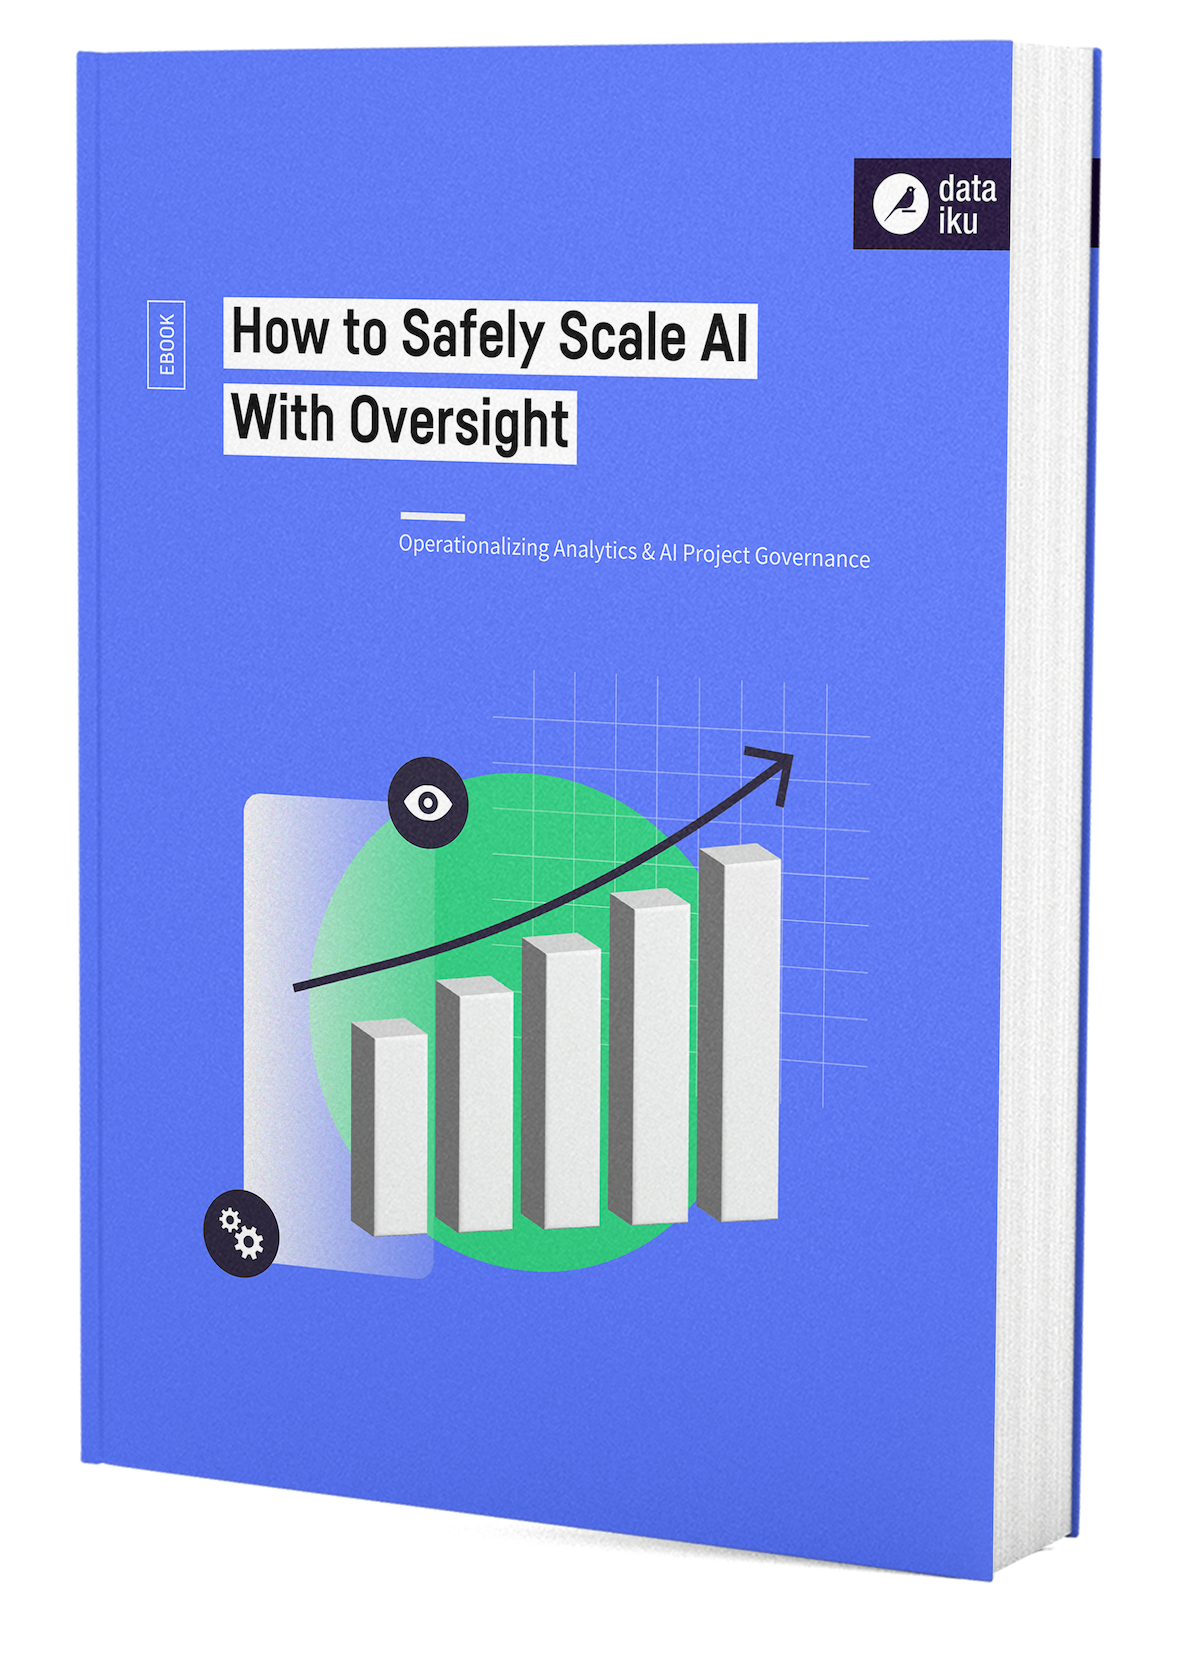 How to safely scale AI - cover mockup@2x (1)-1